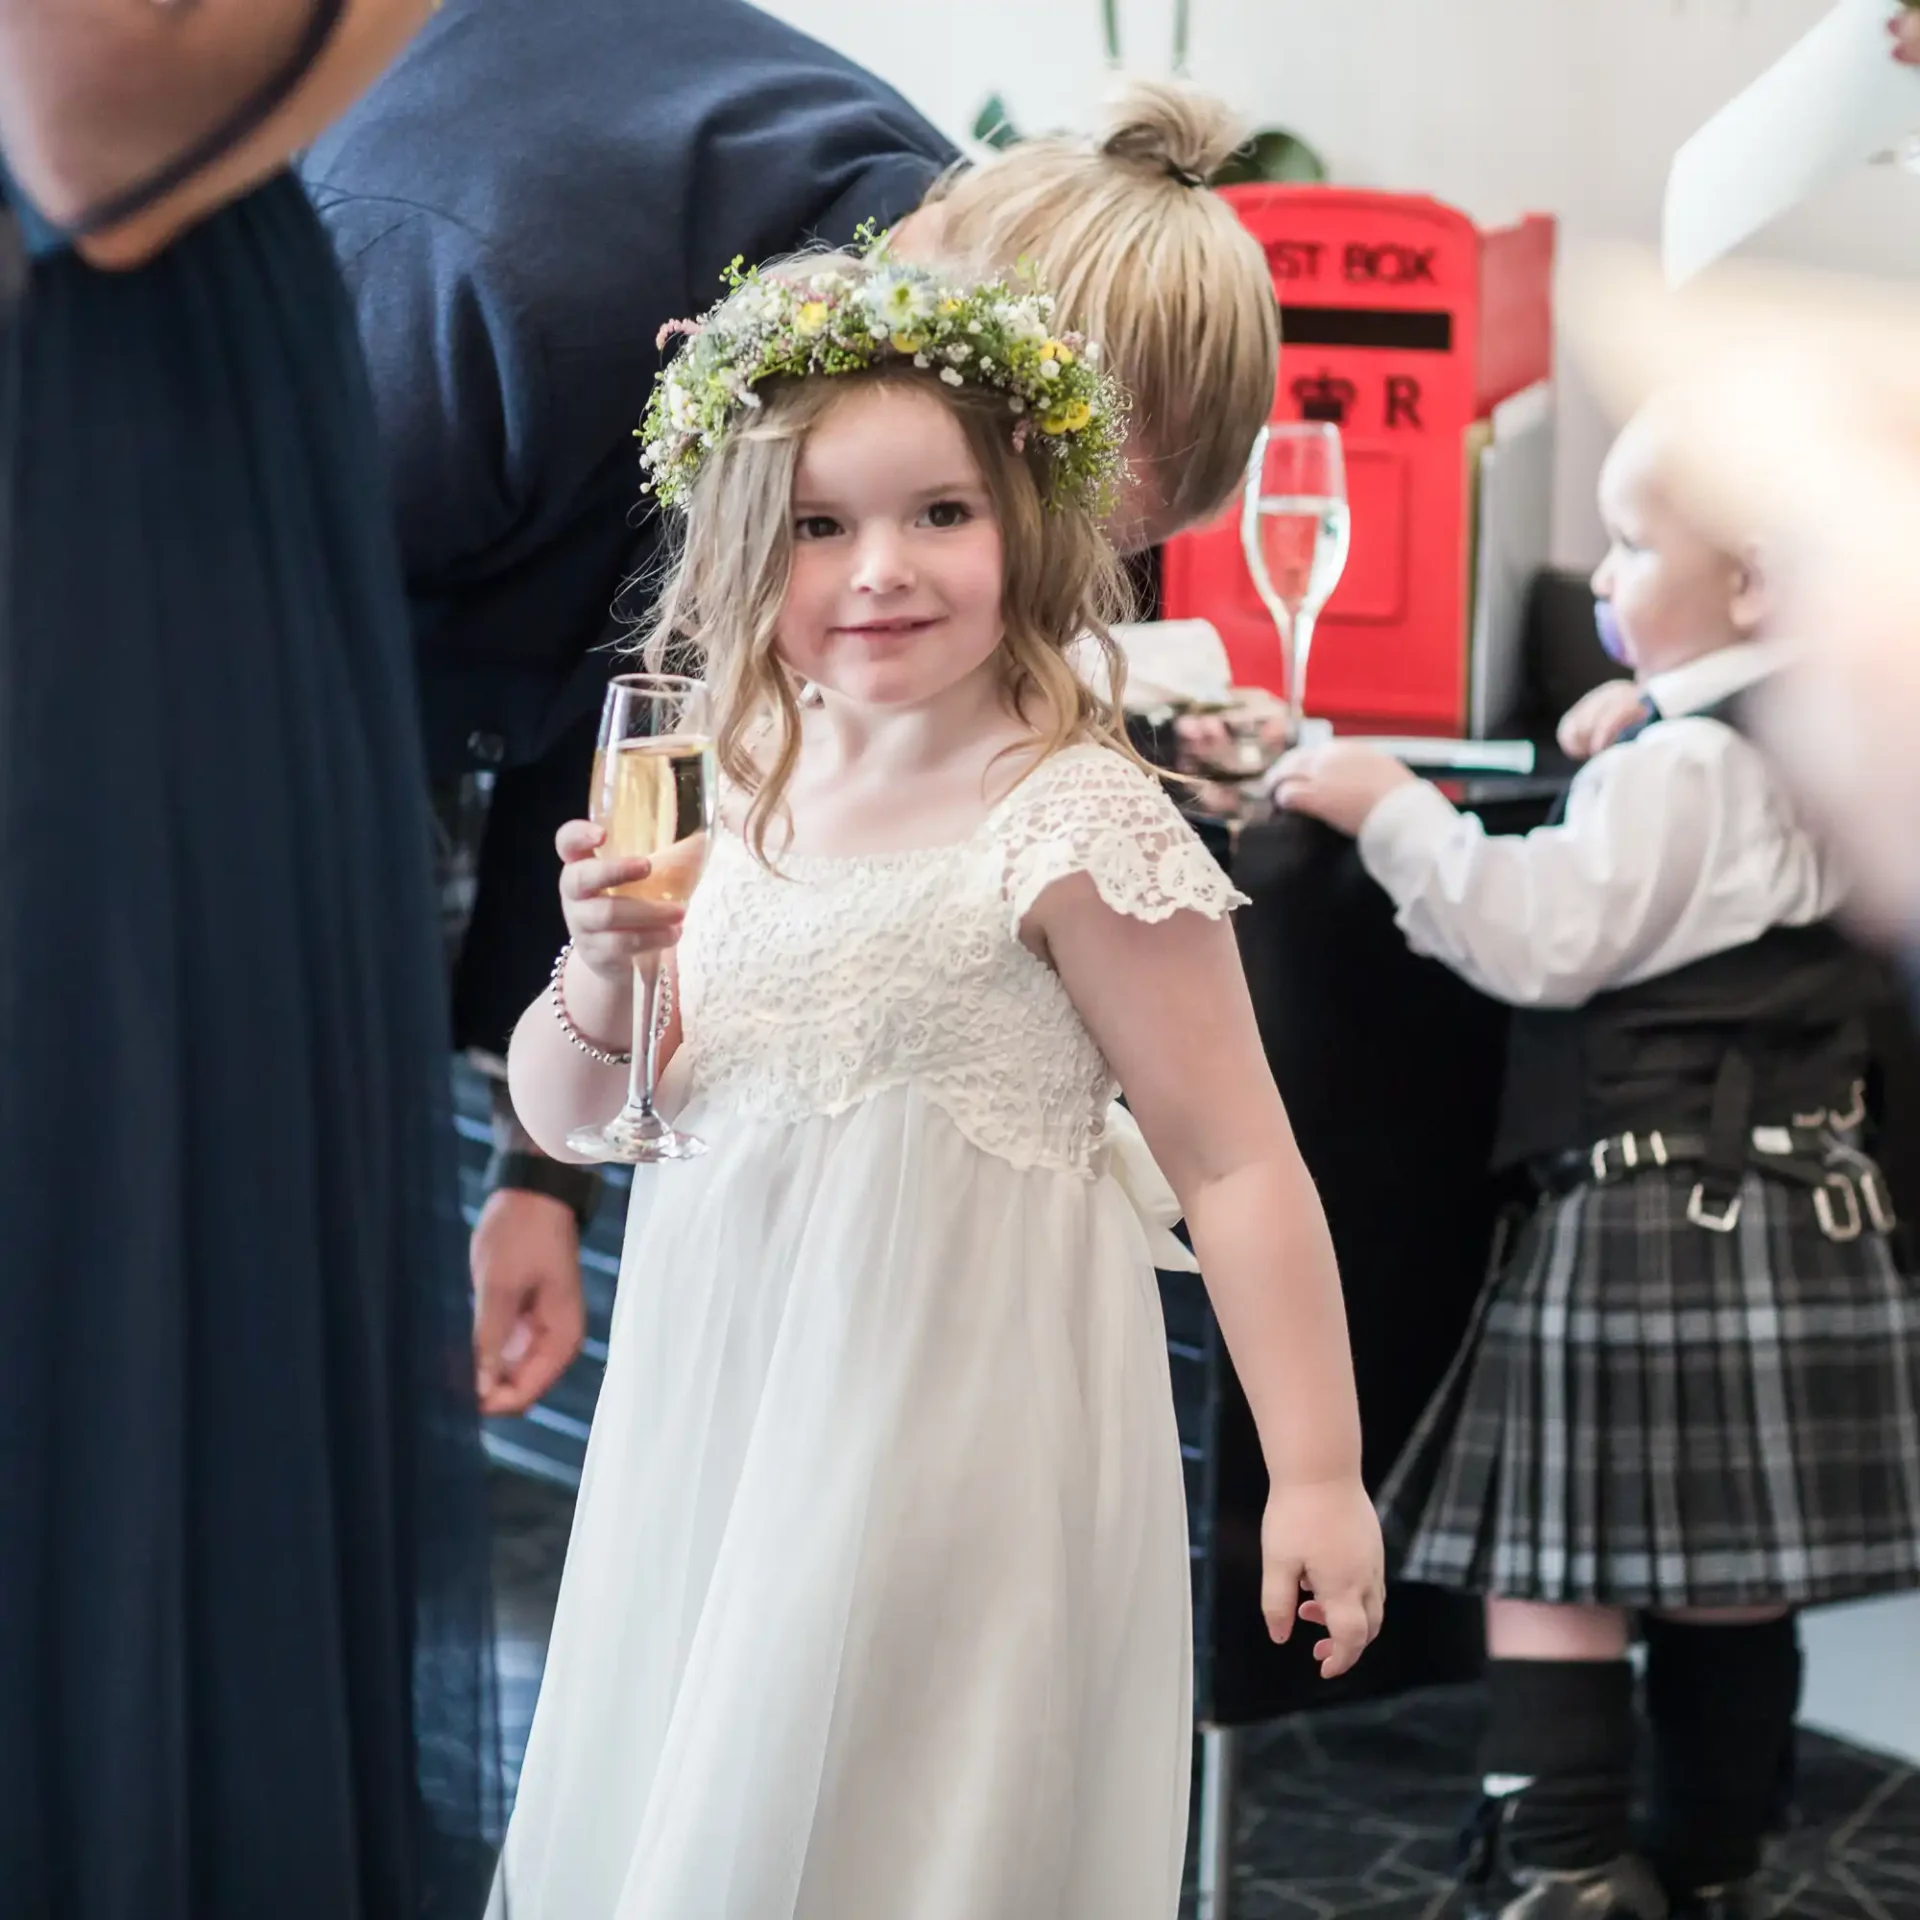 A young girl in a white dress and floral wreath smiles while holding a champagne glass at a festive gathering.